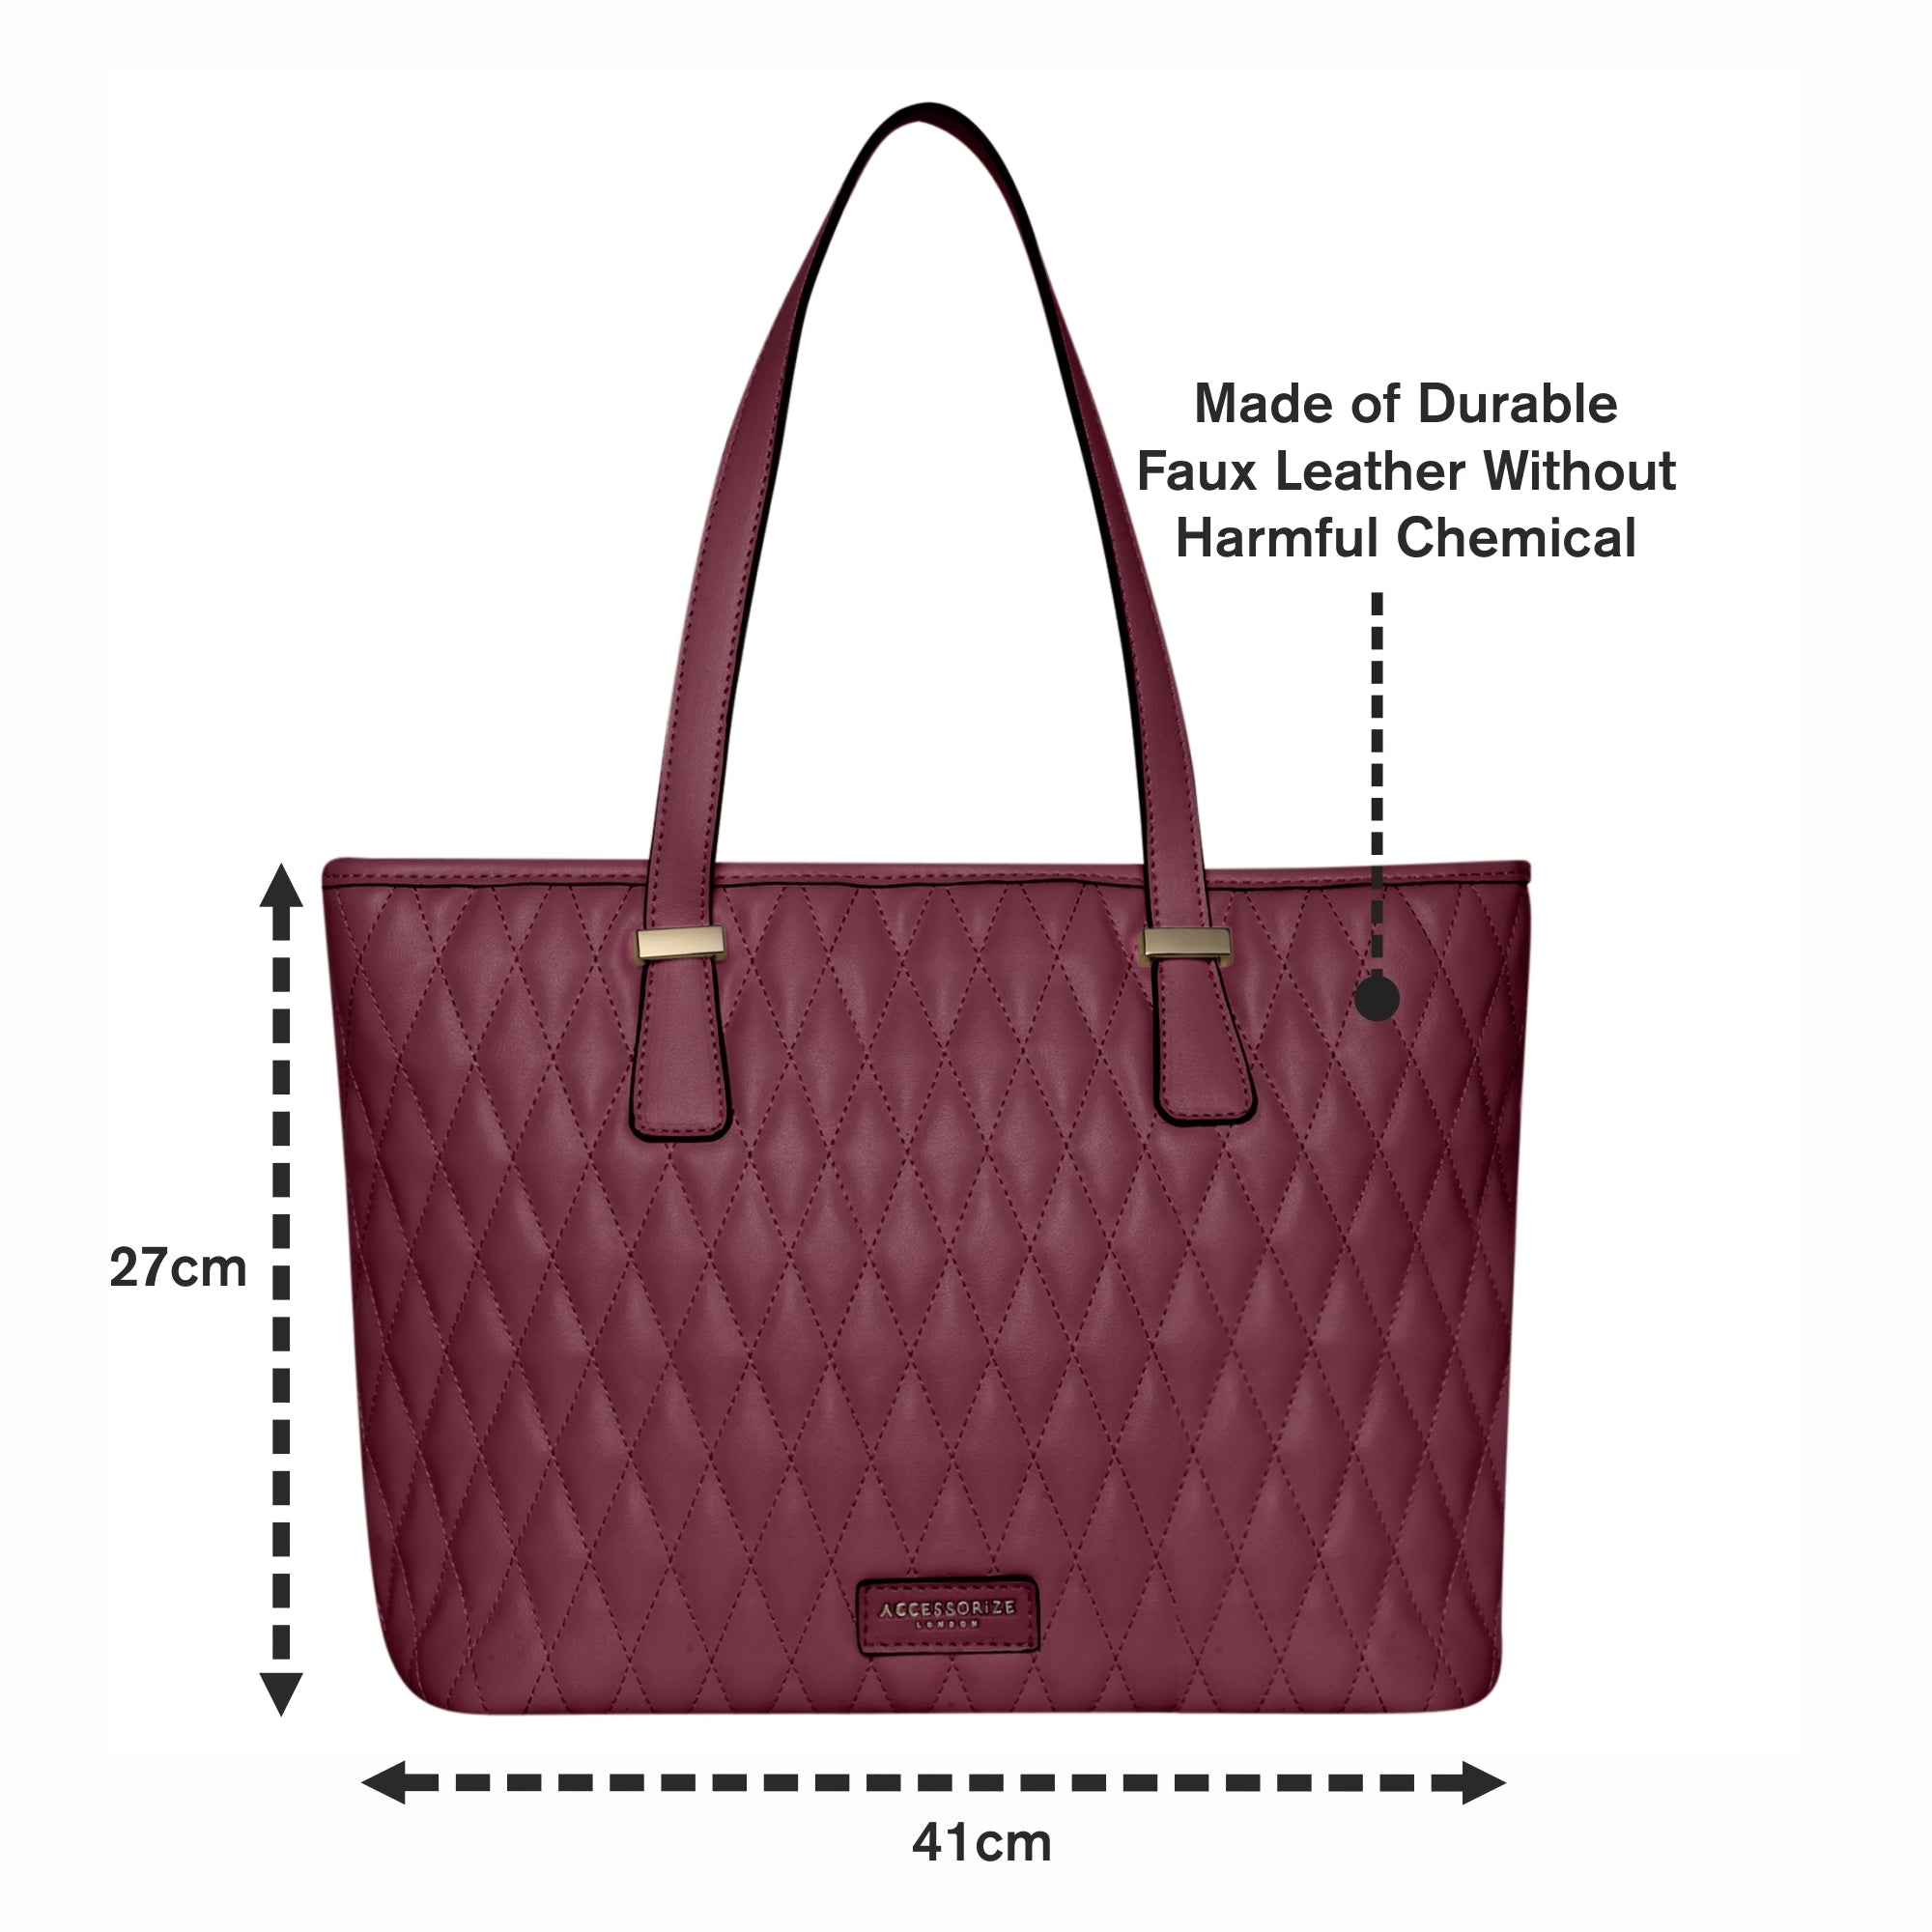 Accessorize London Women's Faux Leather Maroon Lannister quilted tote Bag